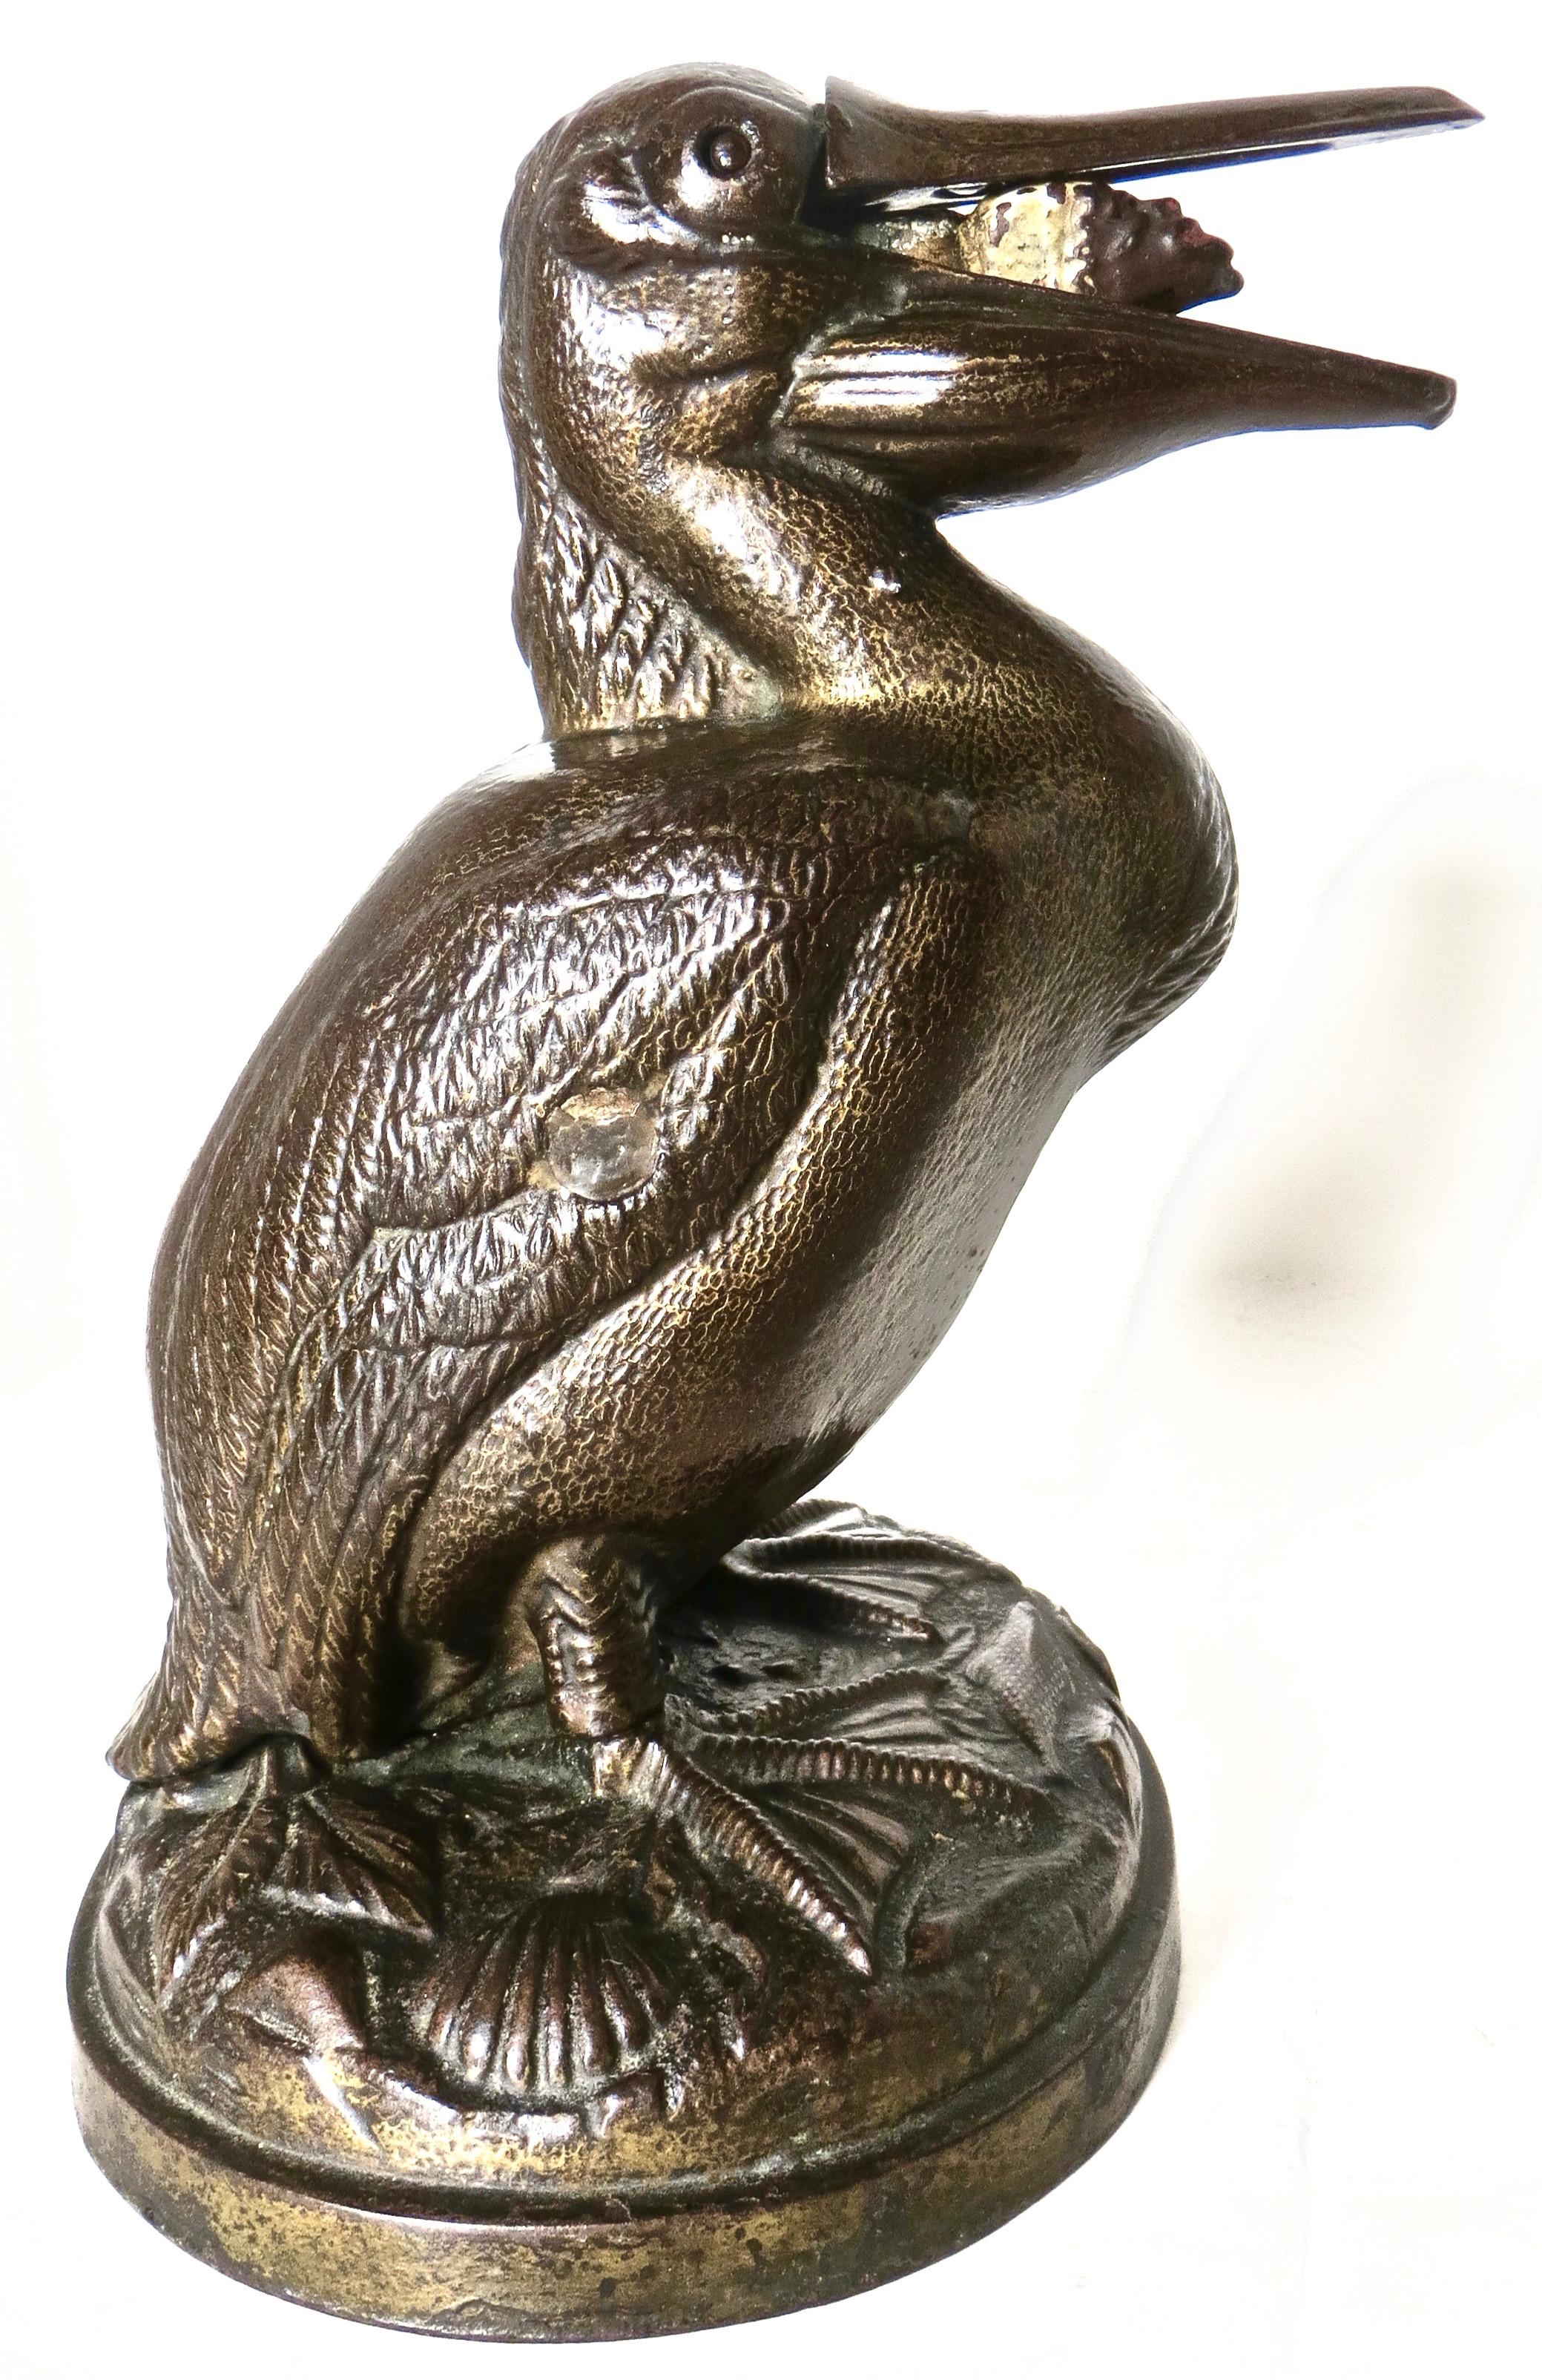 The Pelican Mechanical Bank is made of cast iron and was manufactured by The J. & E. Steven's Manufacturing Company, in Cromwell, Connecticut in 1878. It was, however, created by John Gerard of the Trenton Lock & Hardware Company in Trenton, New